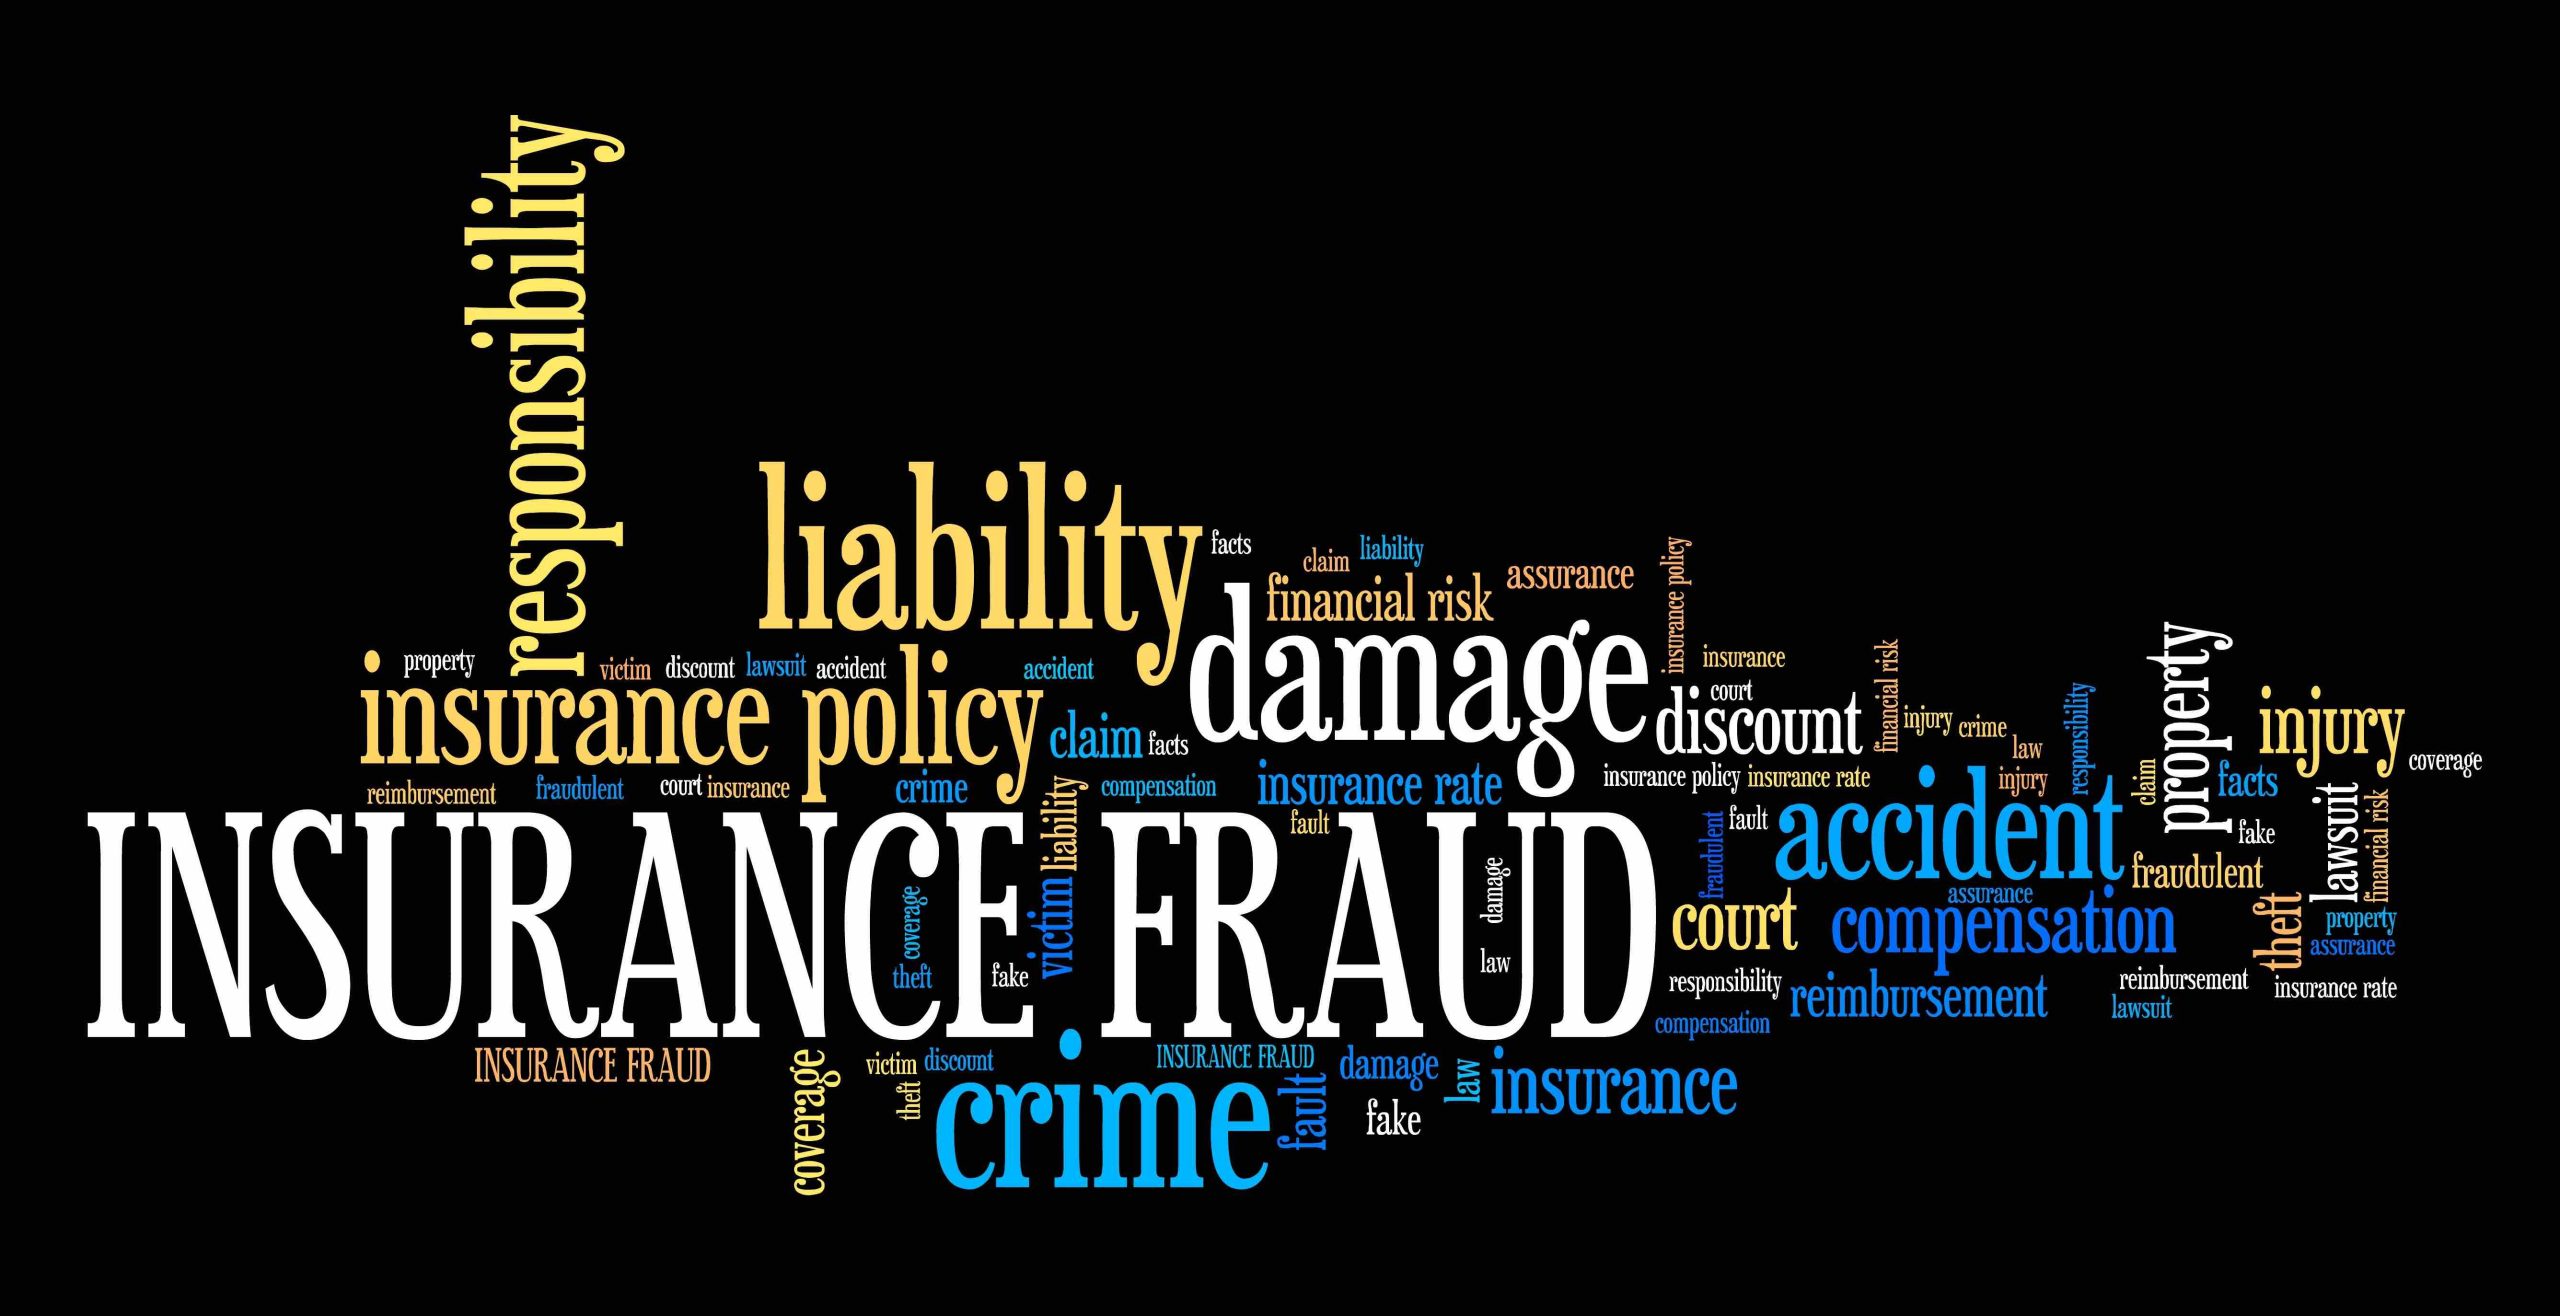 How do I become an insurance fraud investigator in Canada?